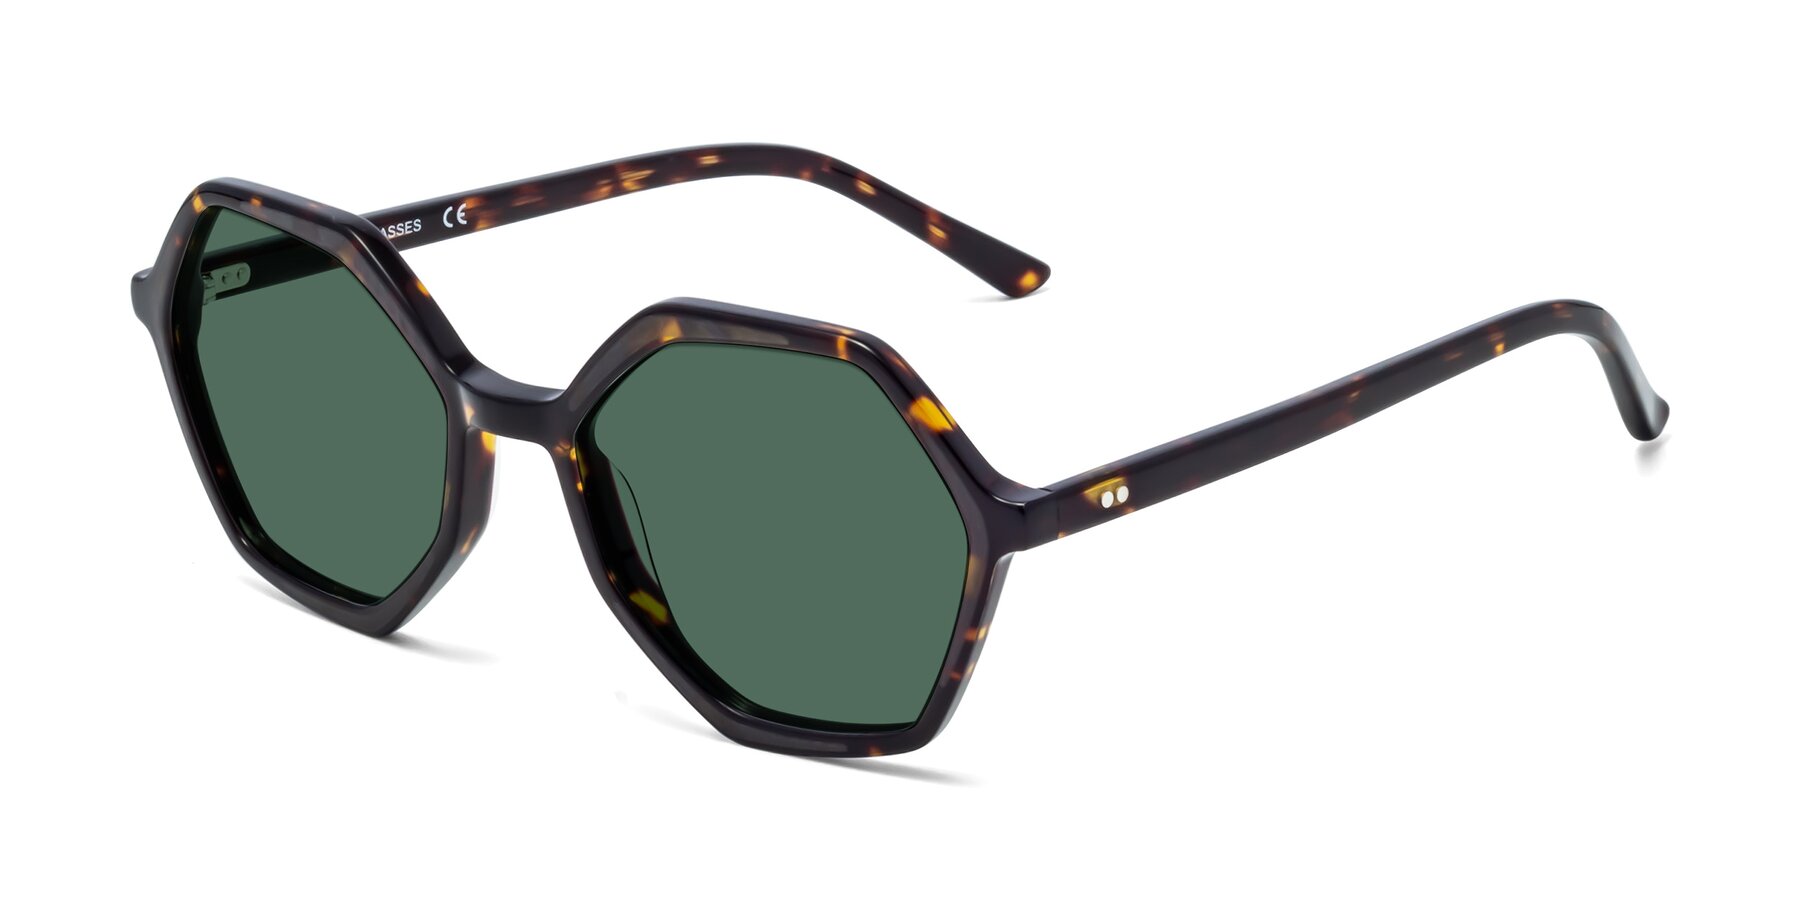 Angle of 1489 in Tortoise with Green Polarized Lenses